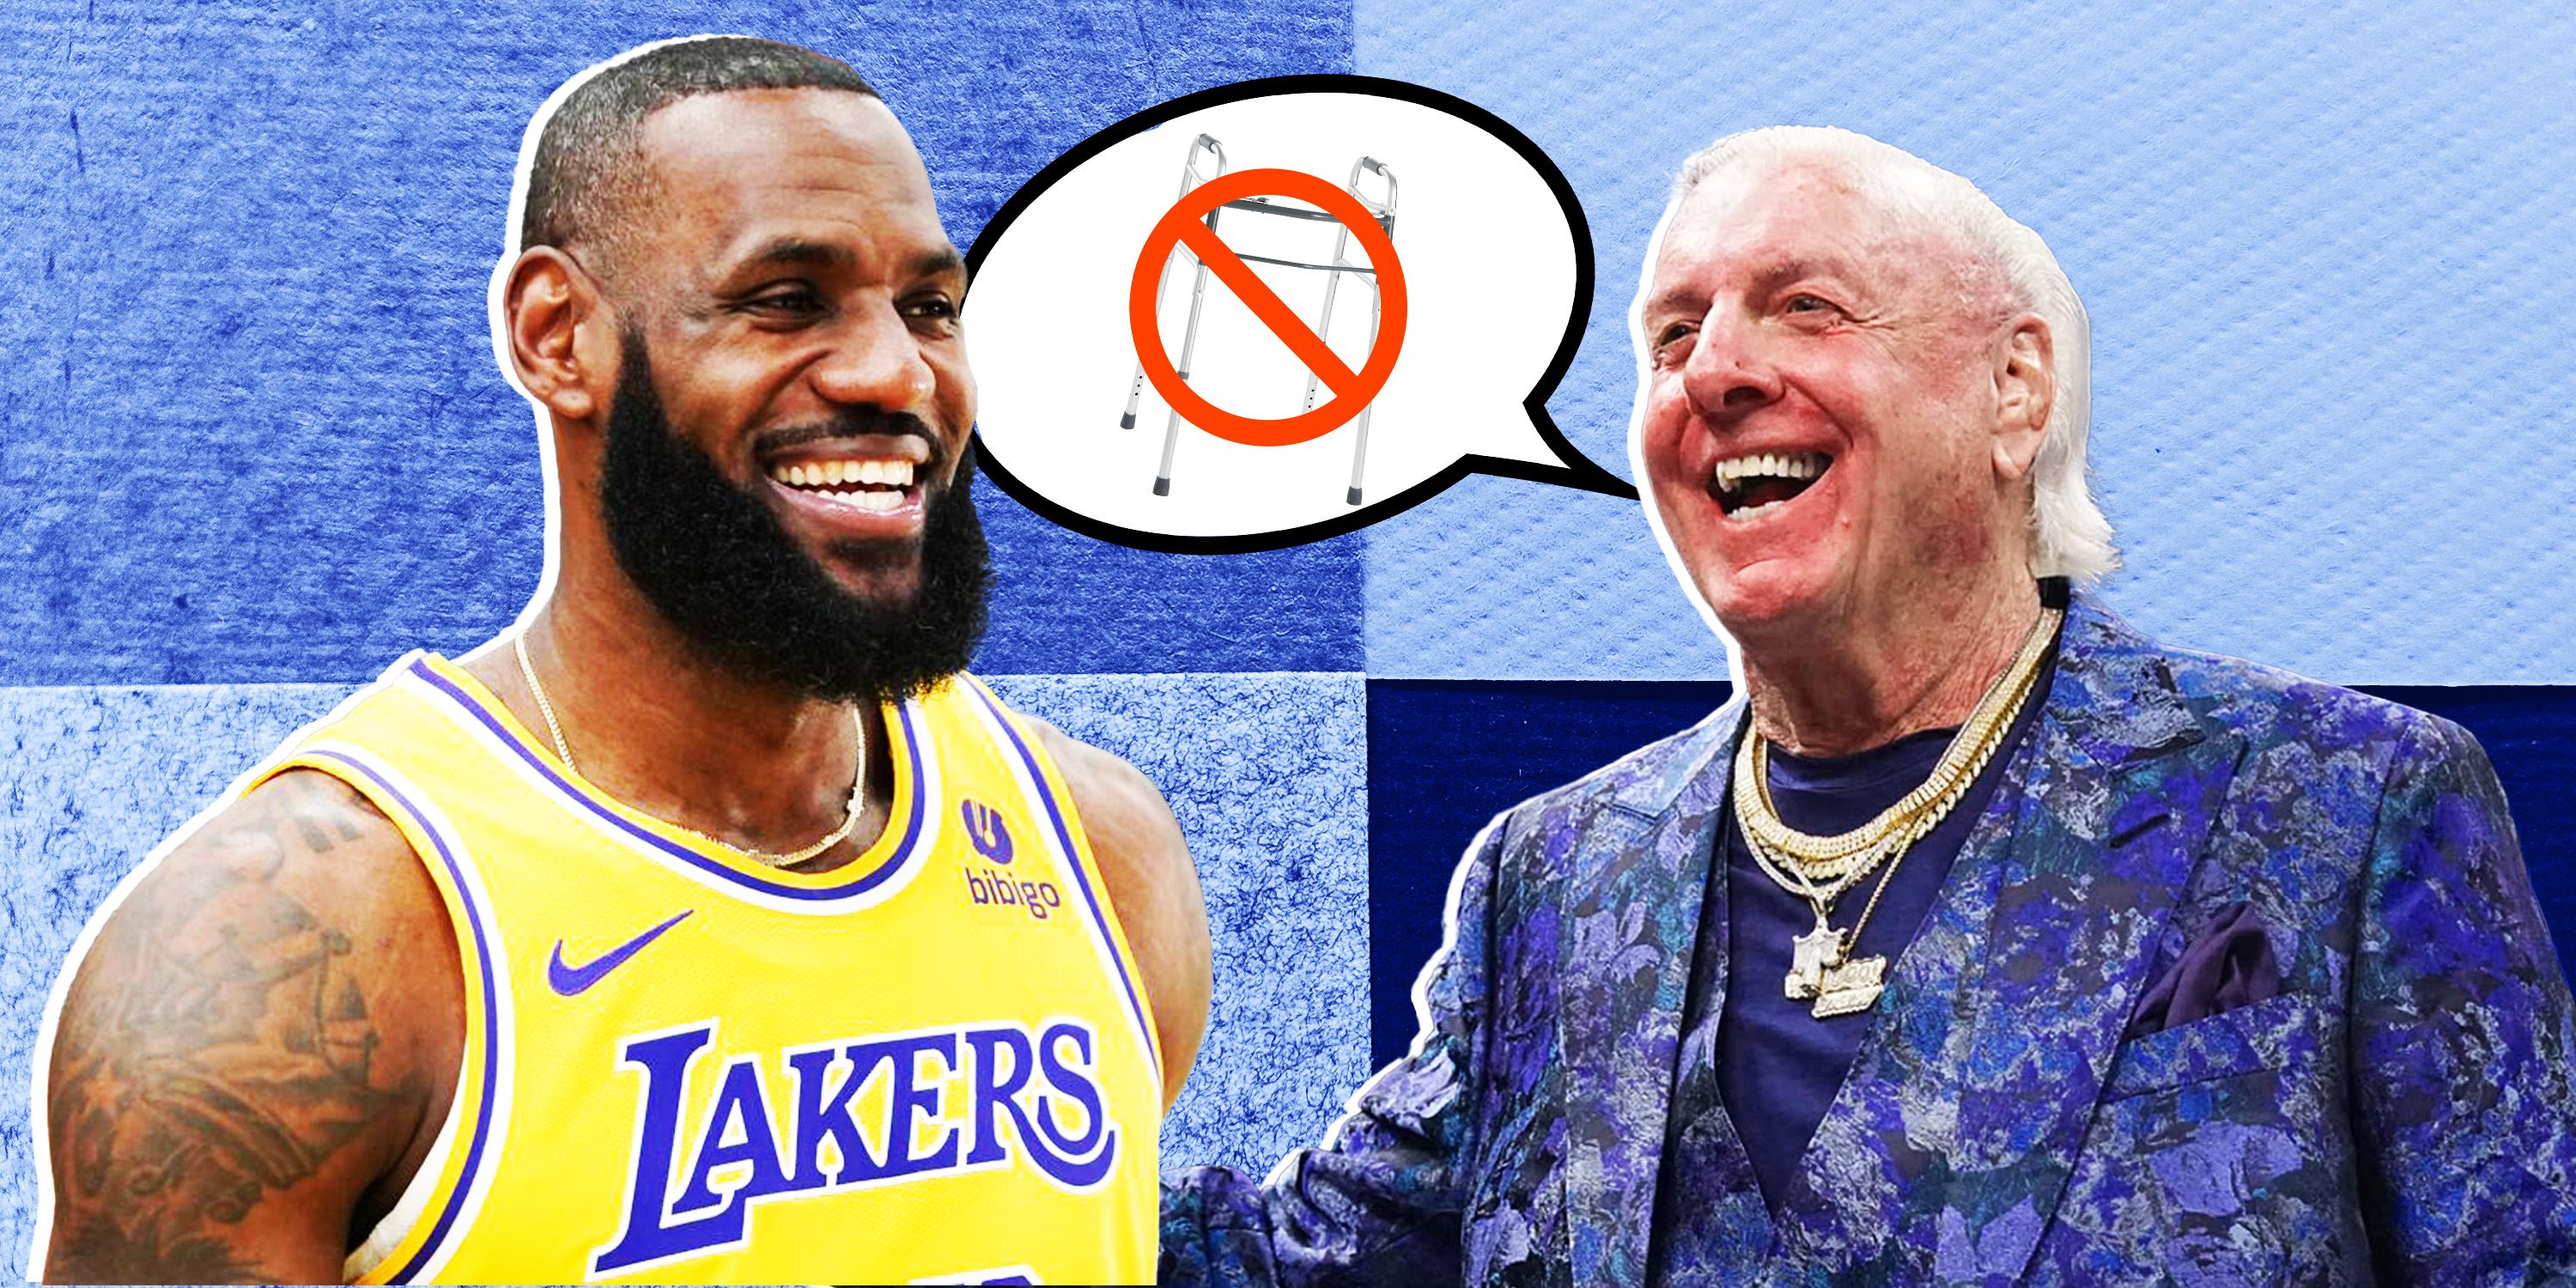 Ric Flair defends LeBron